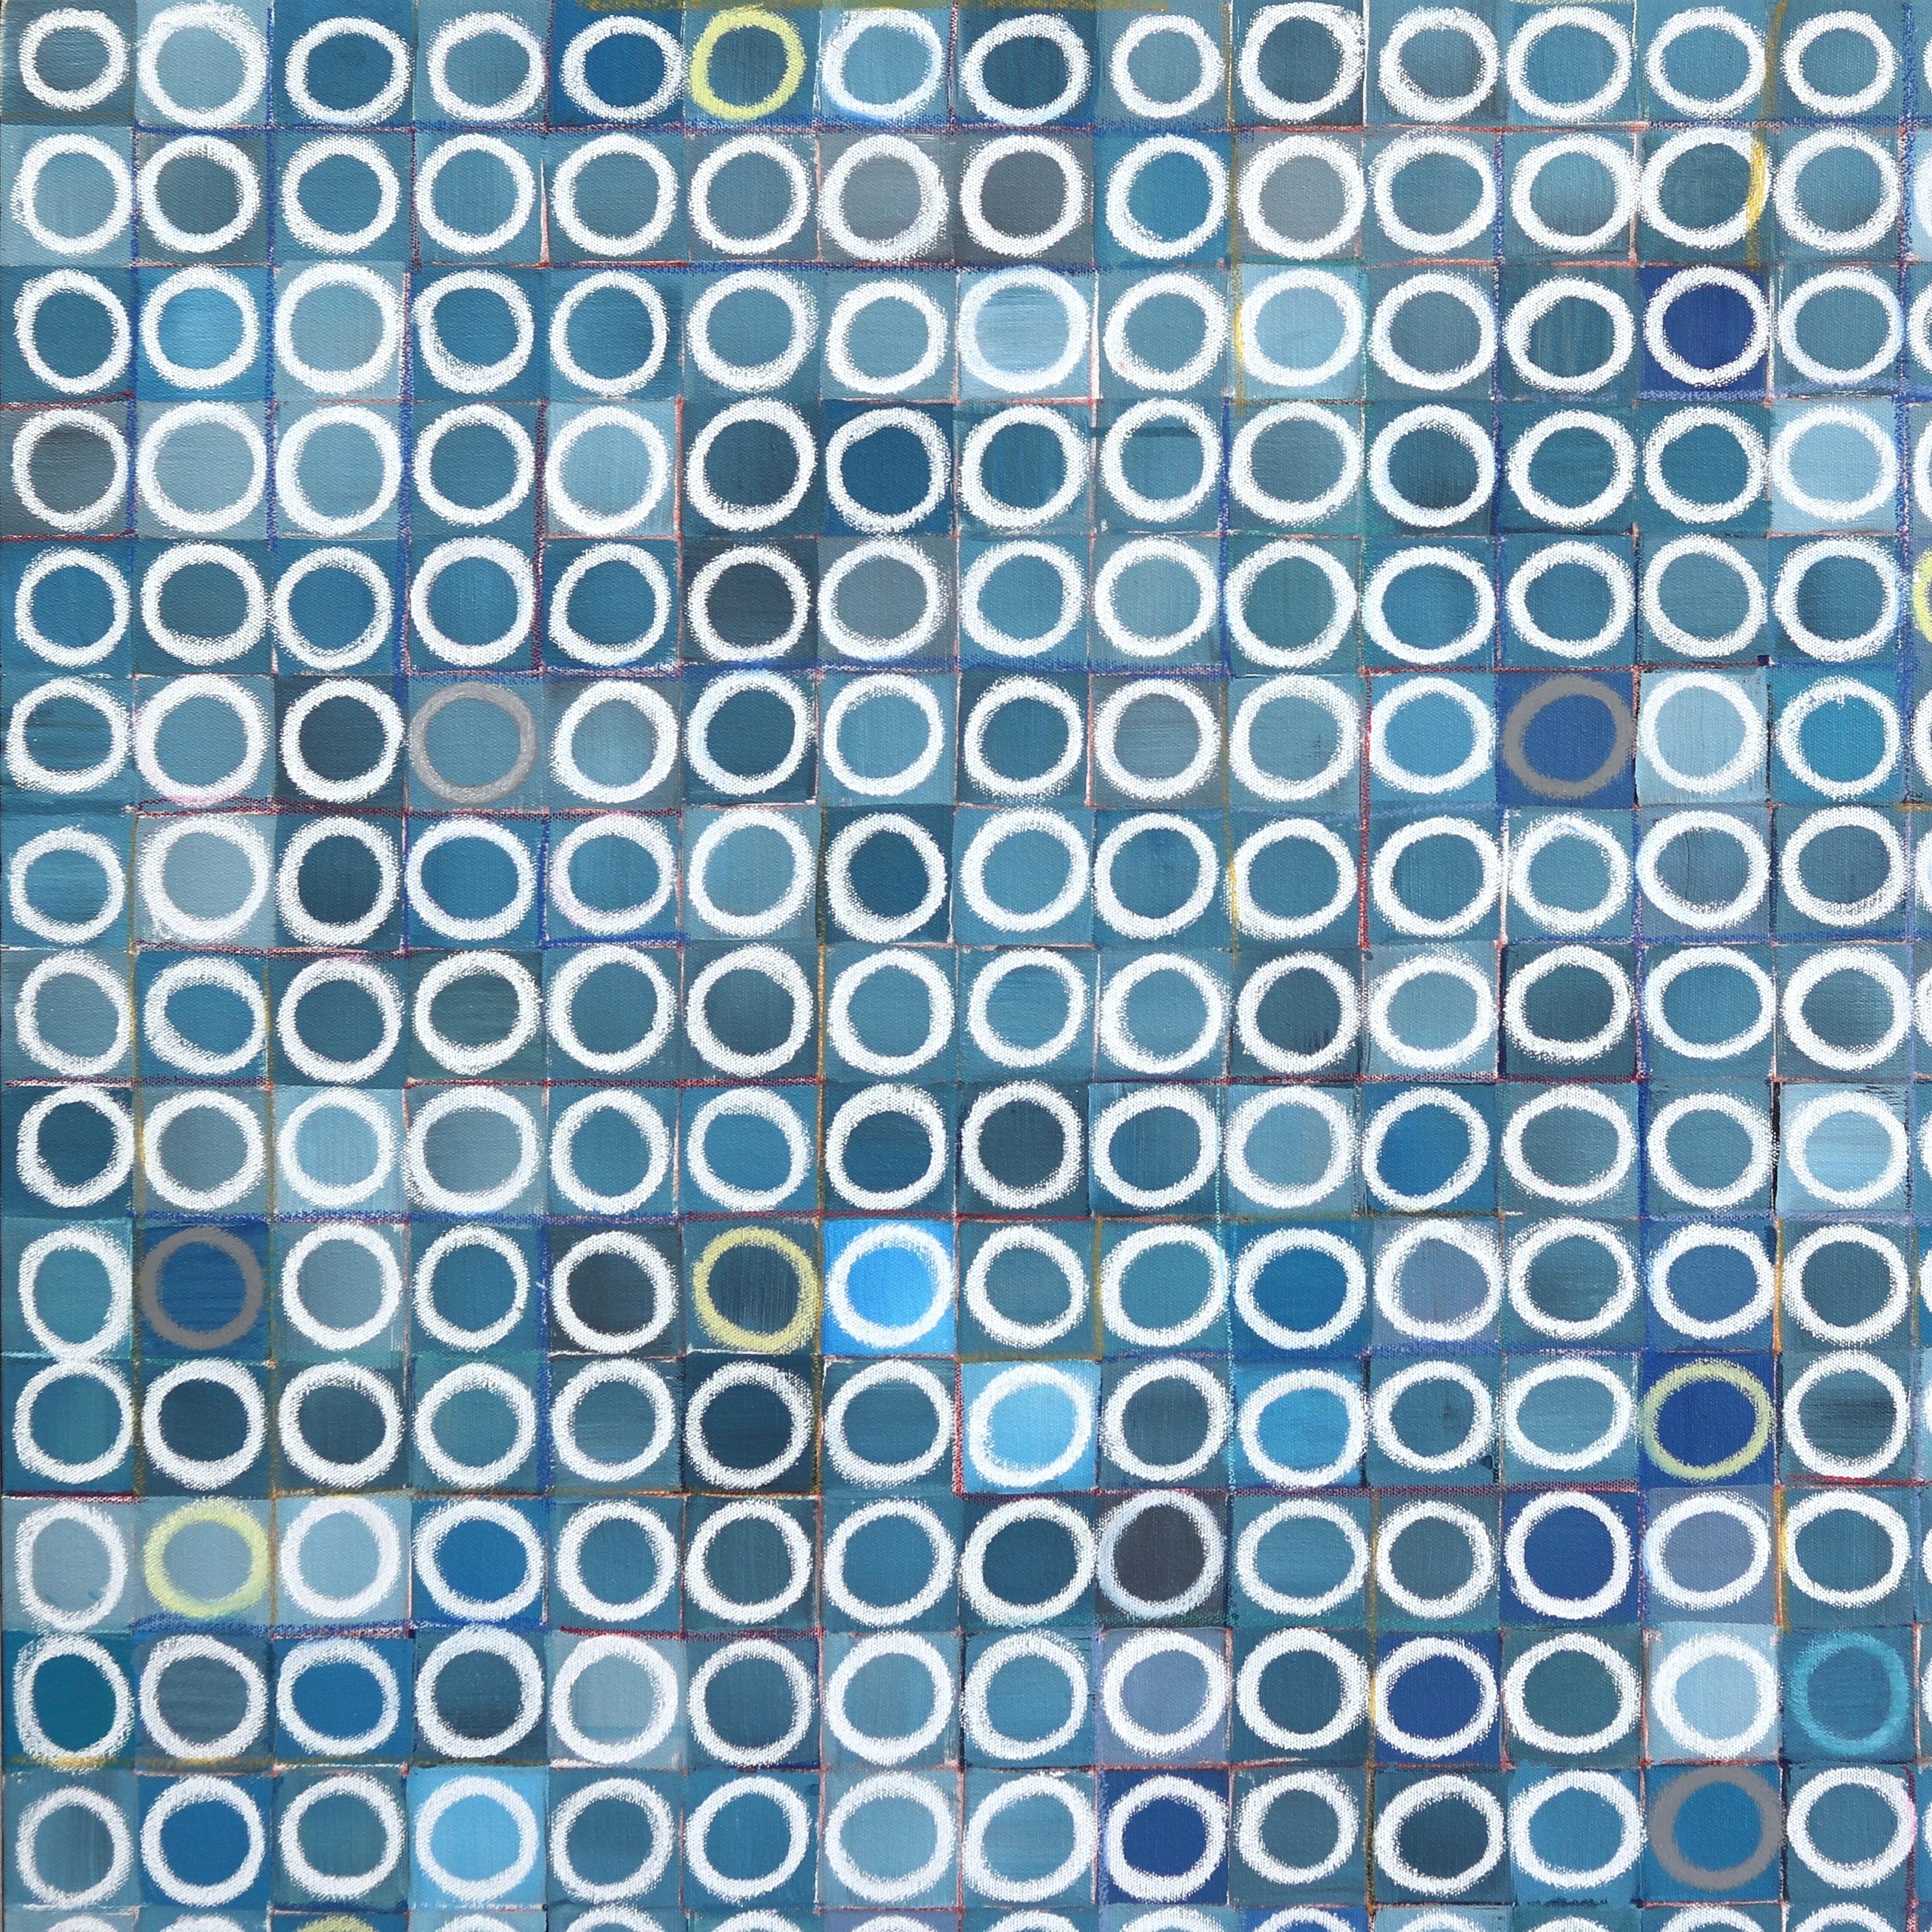 1089 Circles - Large Blue Abstract Geometric Original Painting For Sale 1